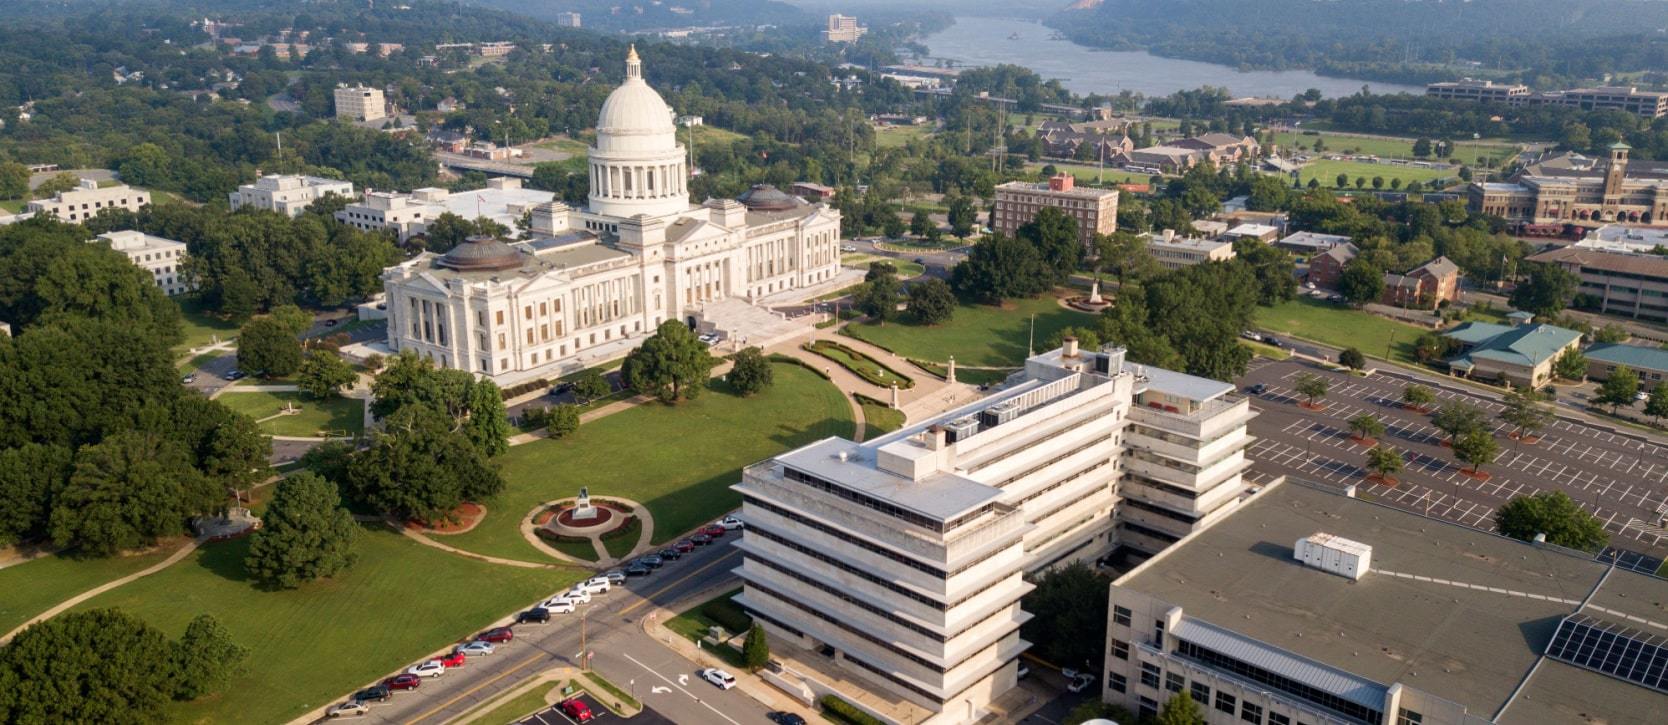 Aerial view over State Capitol building in Little Rock, Arkansas